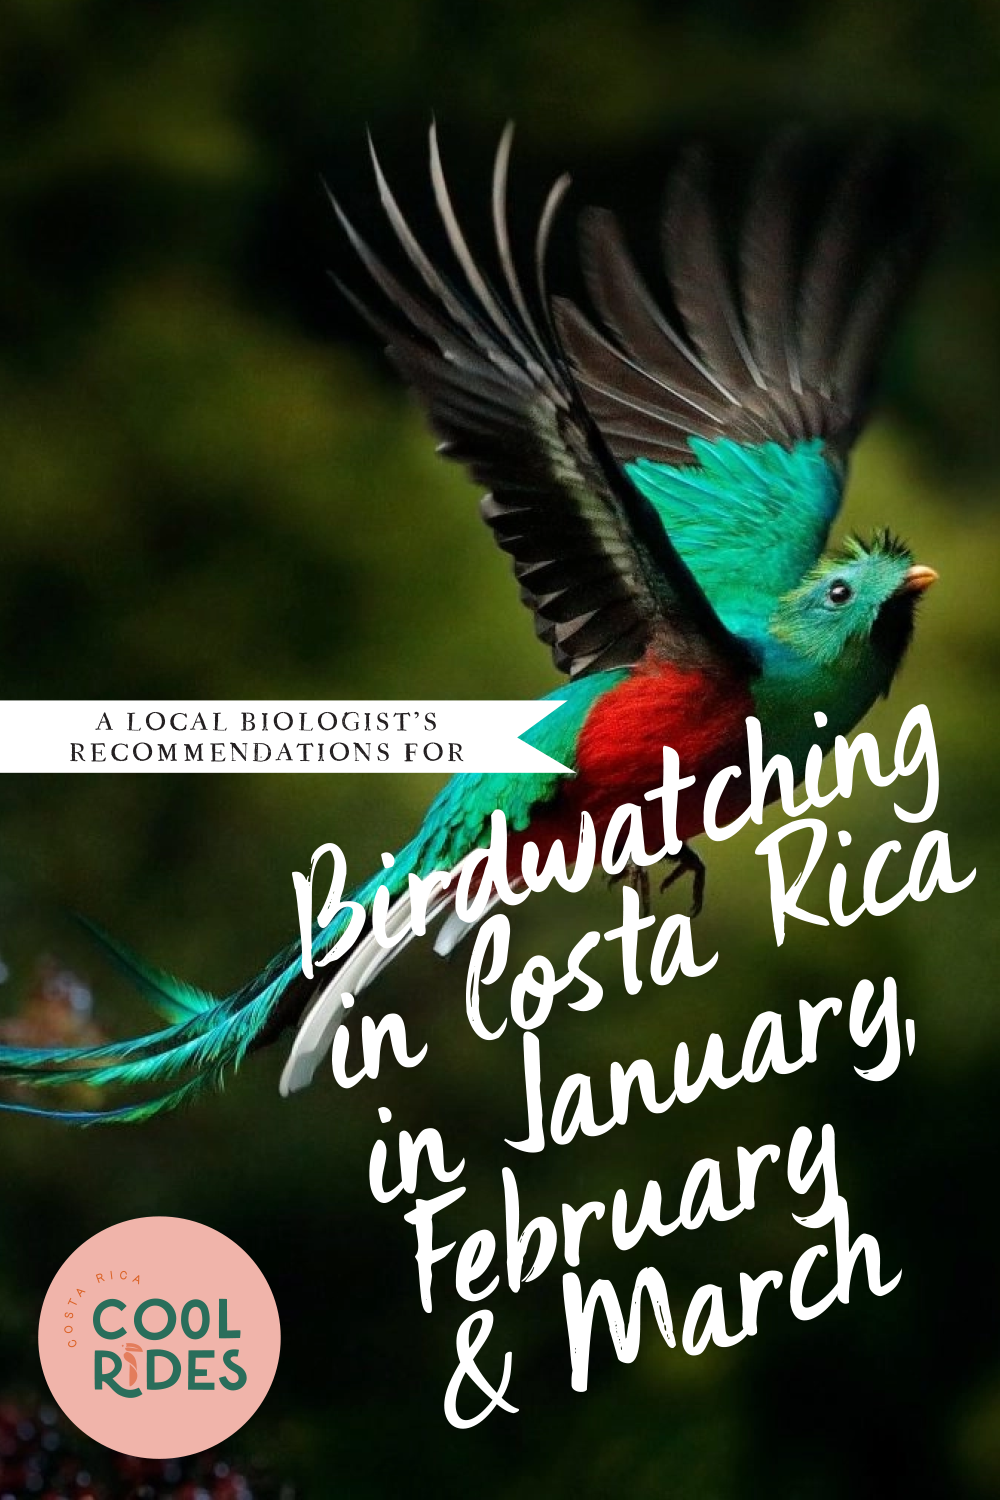 https://www.costaricacoolrides.com/tips-on-planning-a-trip-to-costa-rica/birdwatching-in-costa-rica-in-january-february-and-march